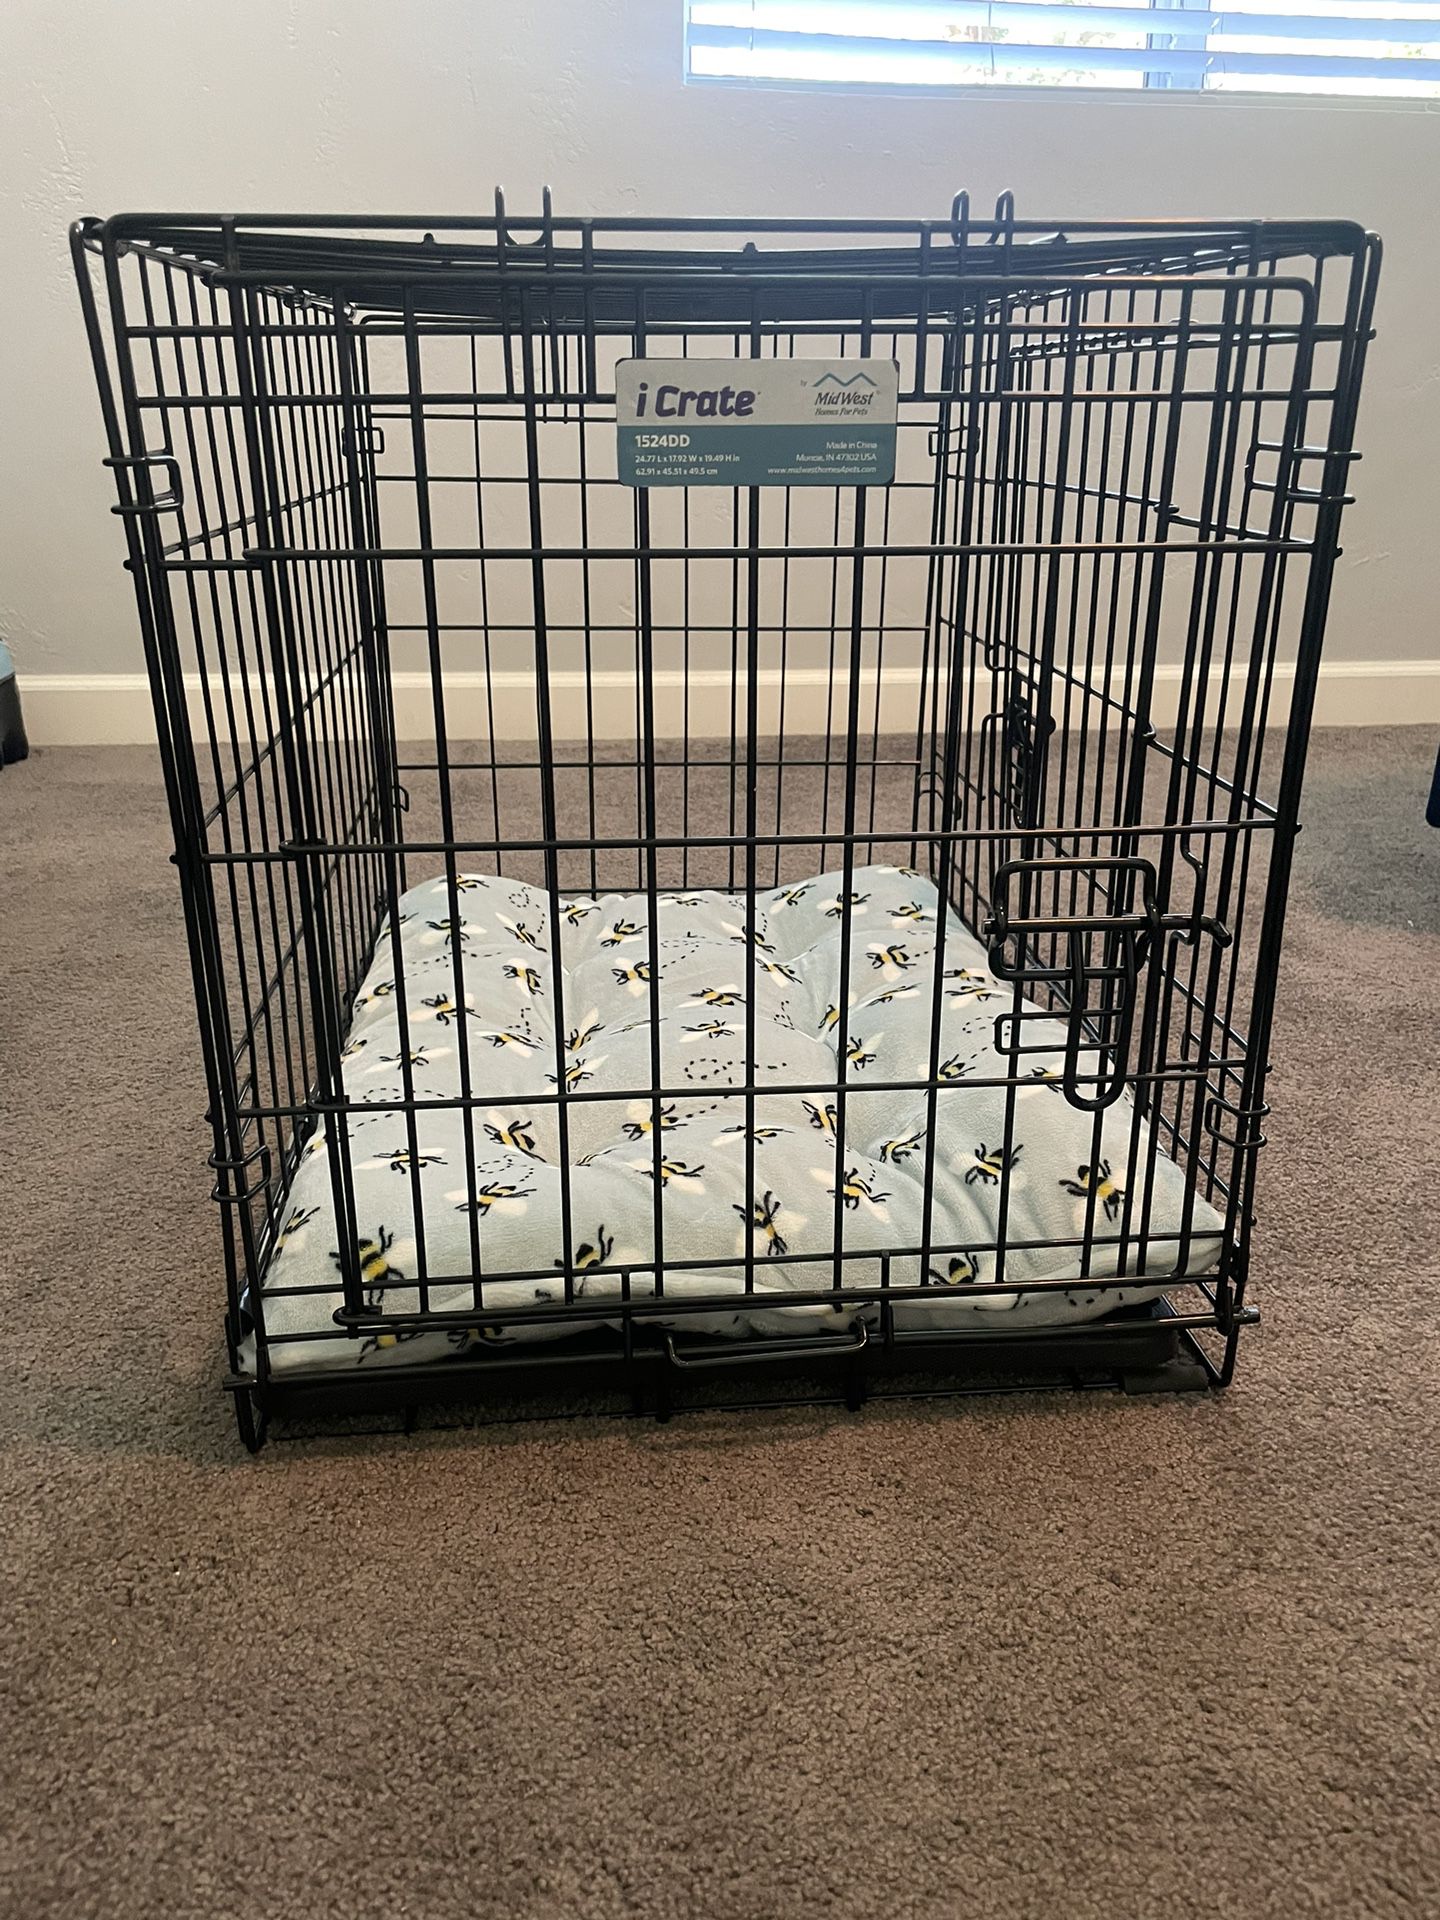 24” Midwest I Crate Dog Crate